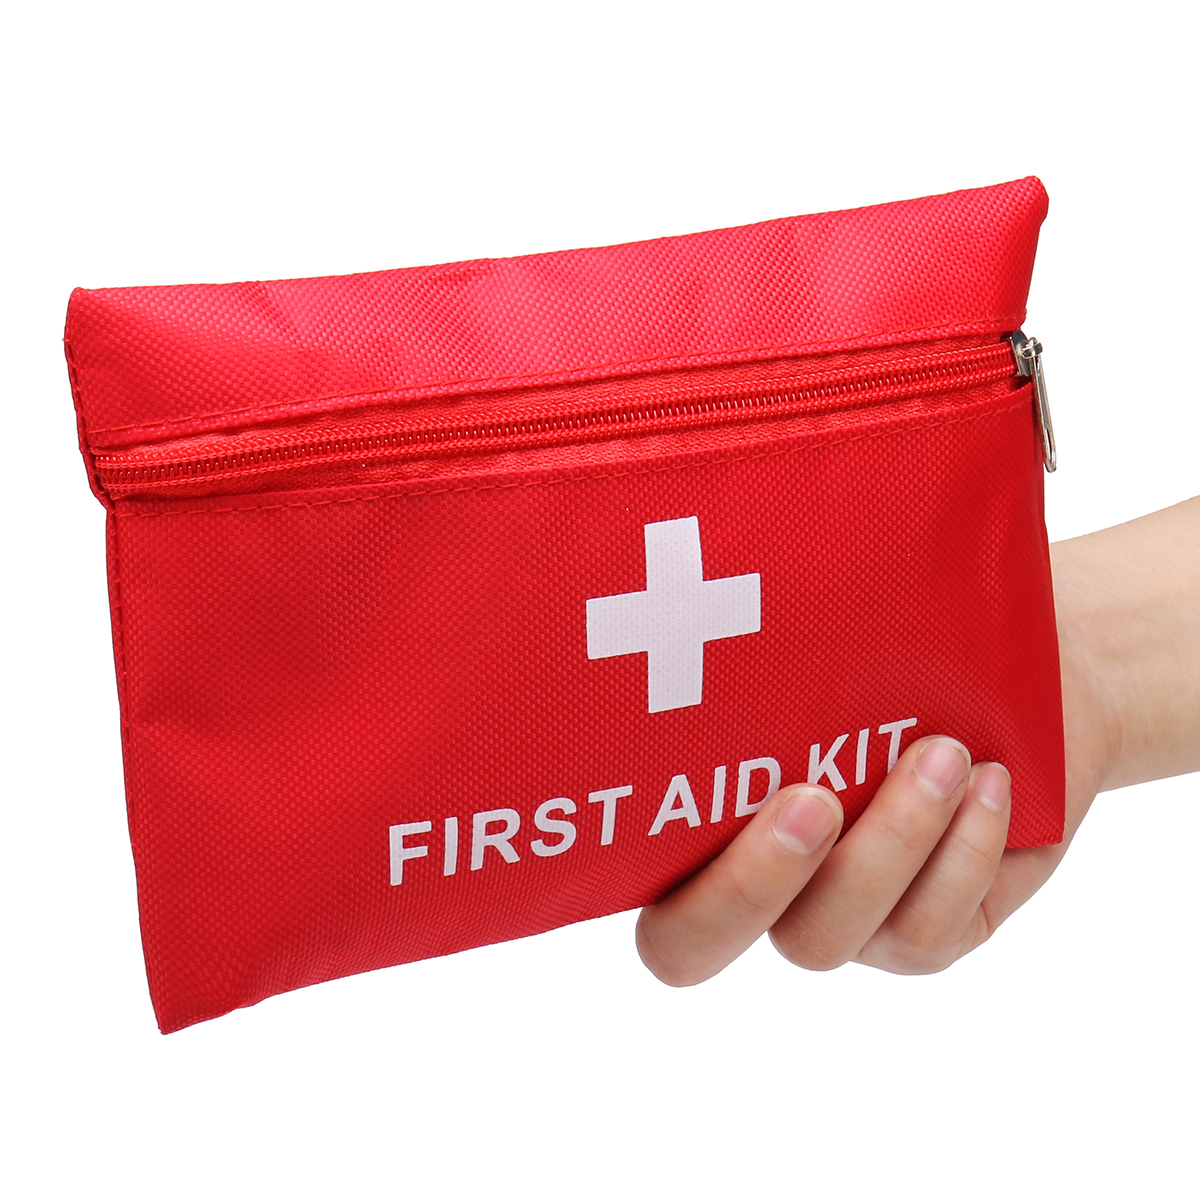 Emergency-First-Aid-Kit-79-Piece-Survival-Supplies-Bag-for-Car-Travel-Home-Emergency-Box-1420491